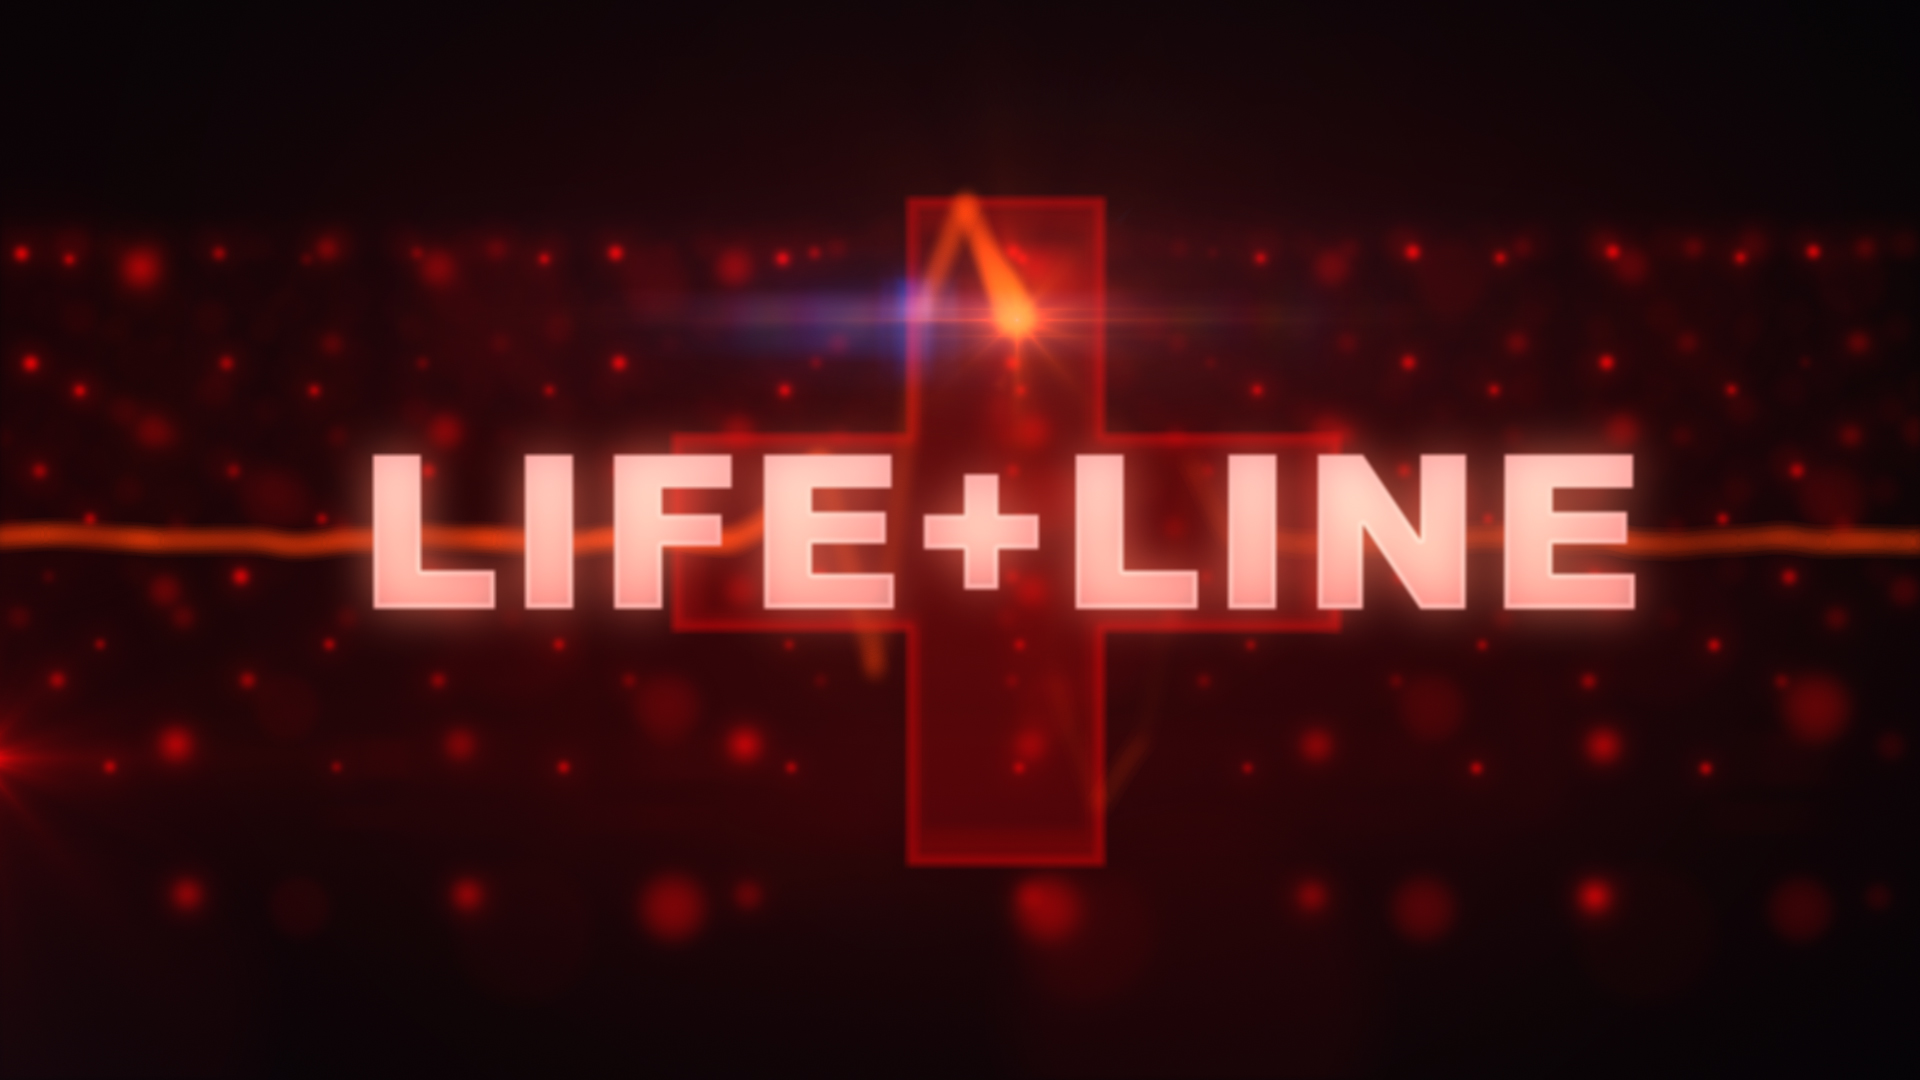 Life is line. The Life of lines. Life line dok.